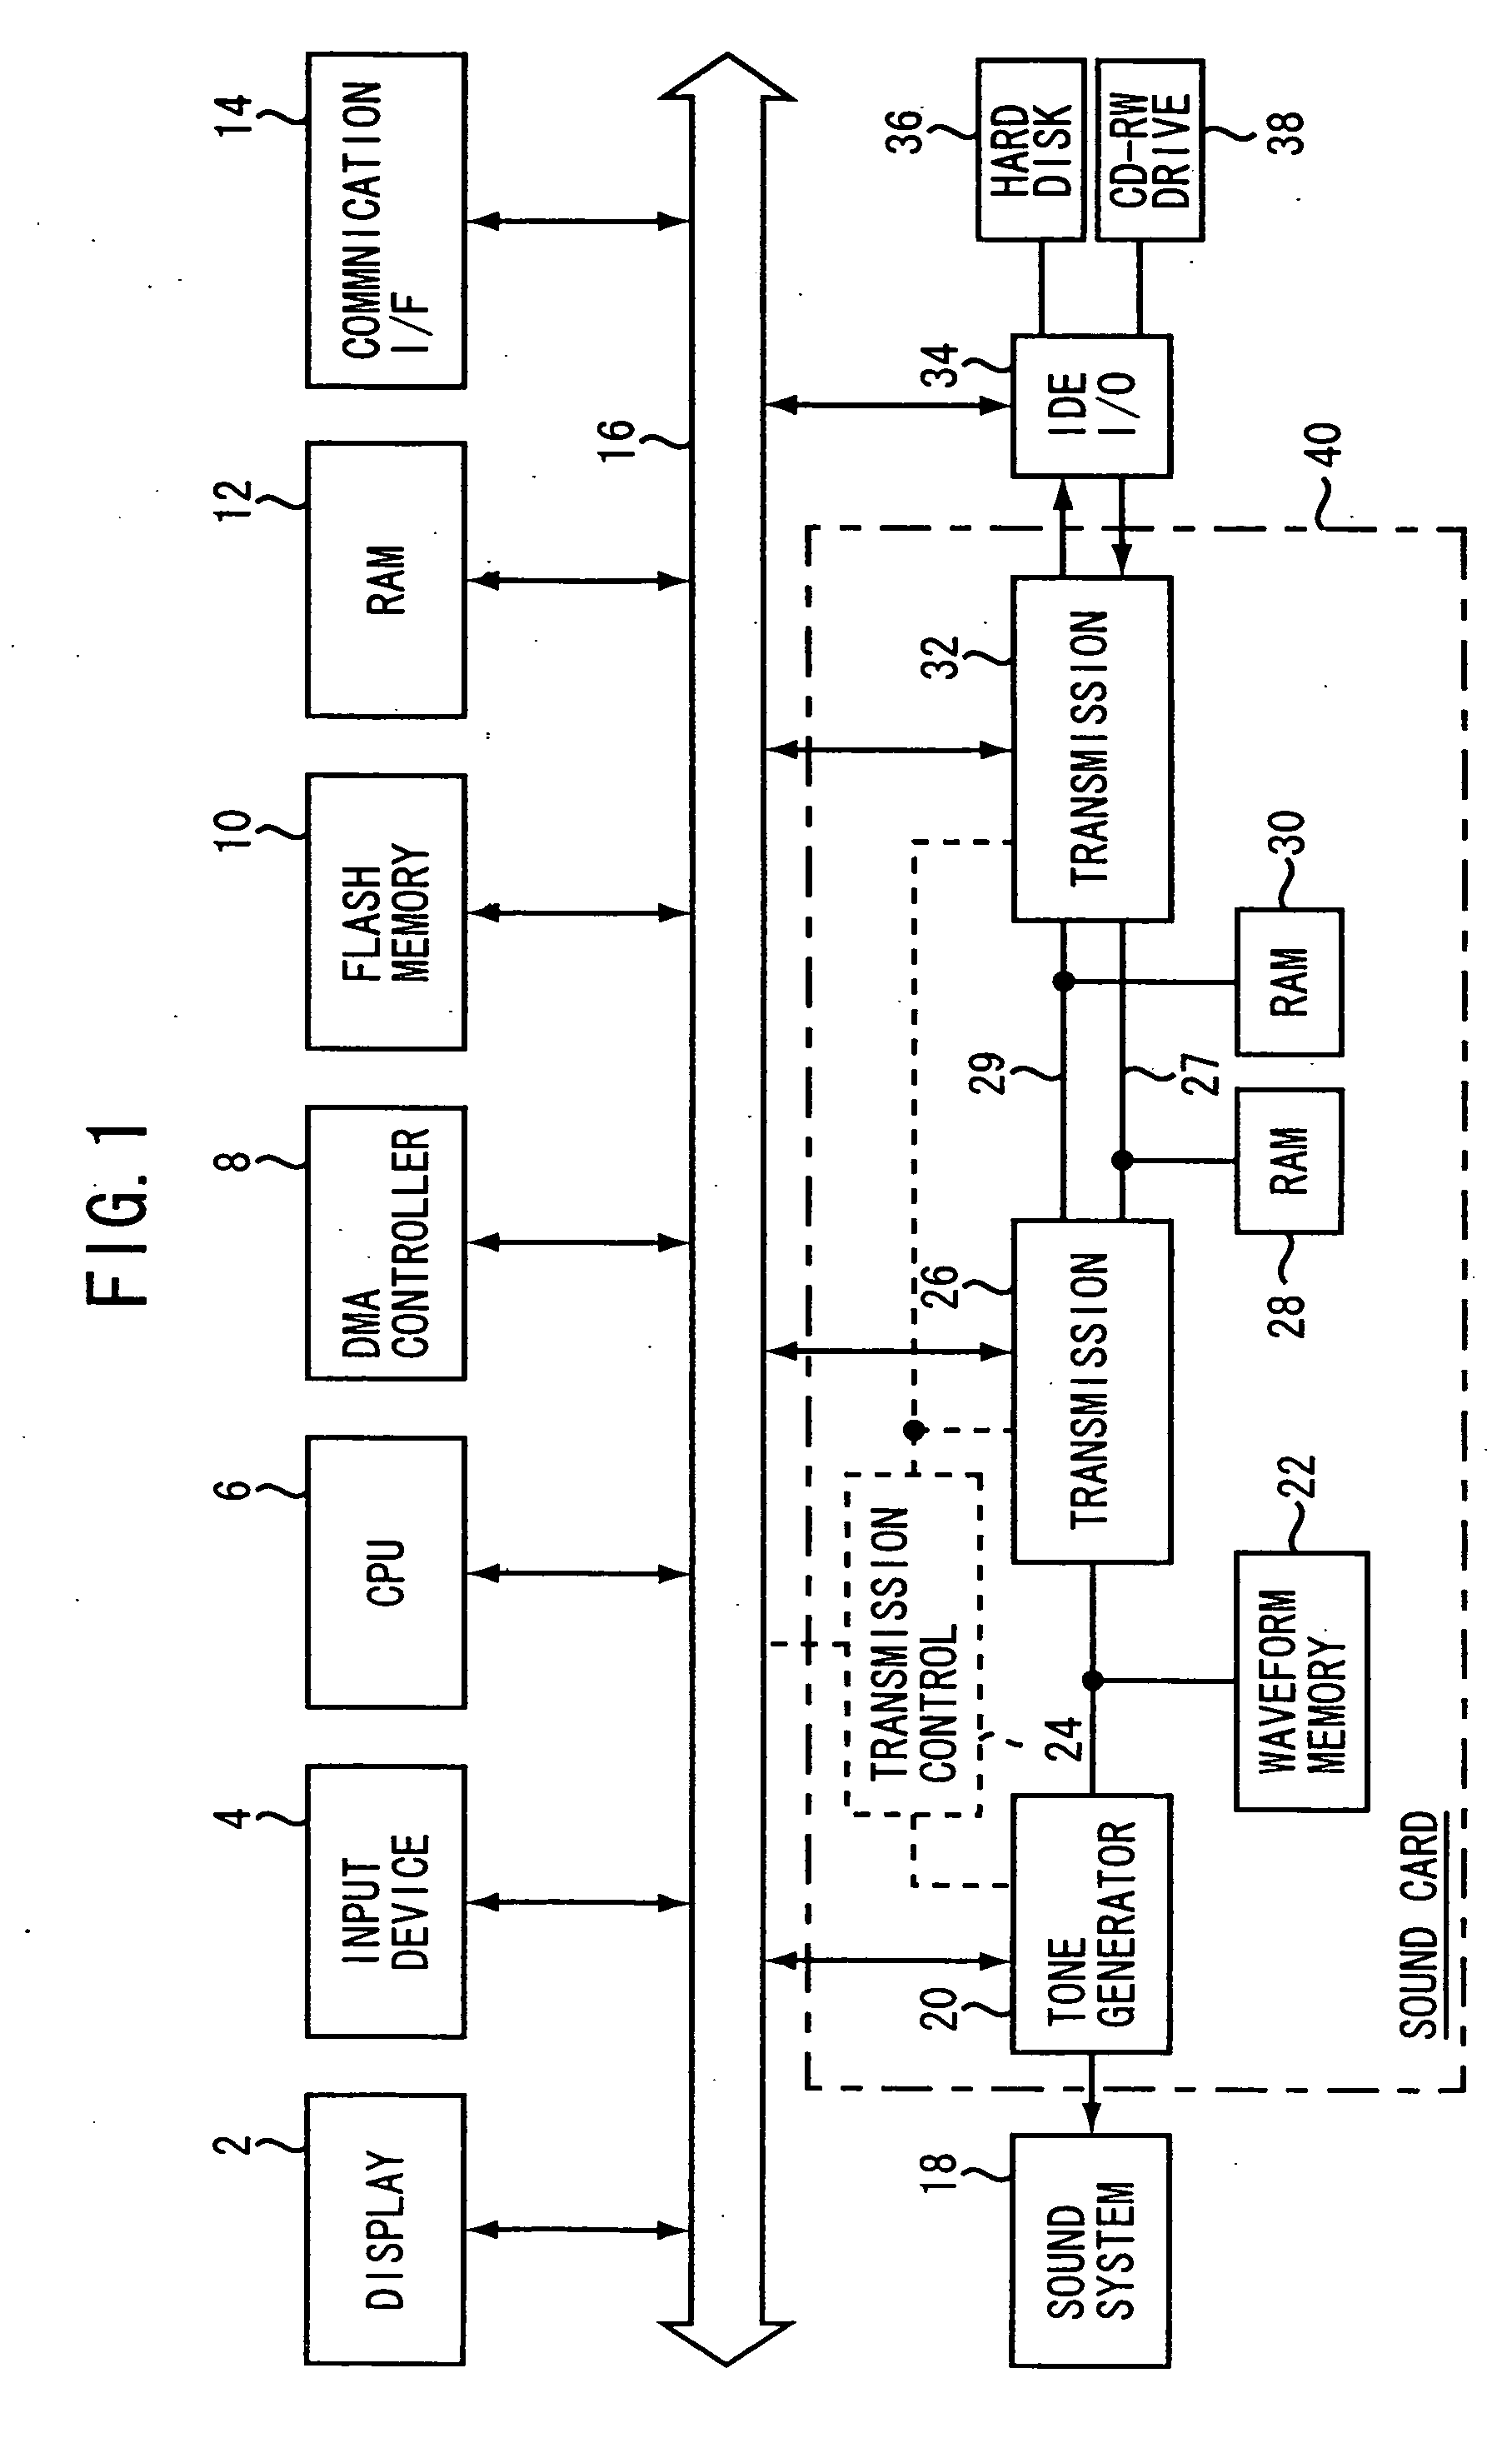 Memory access controller for musical sound generating system